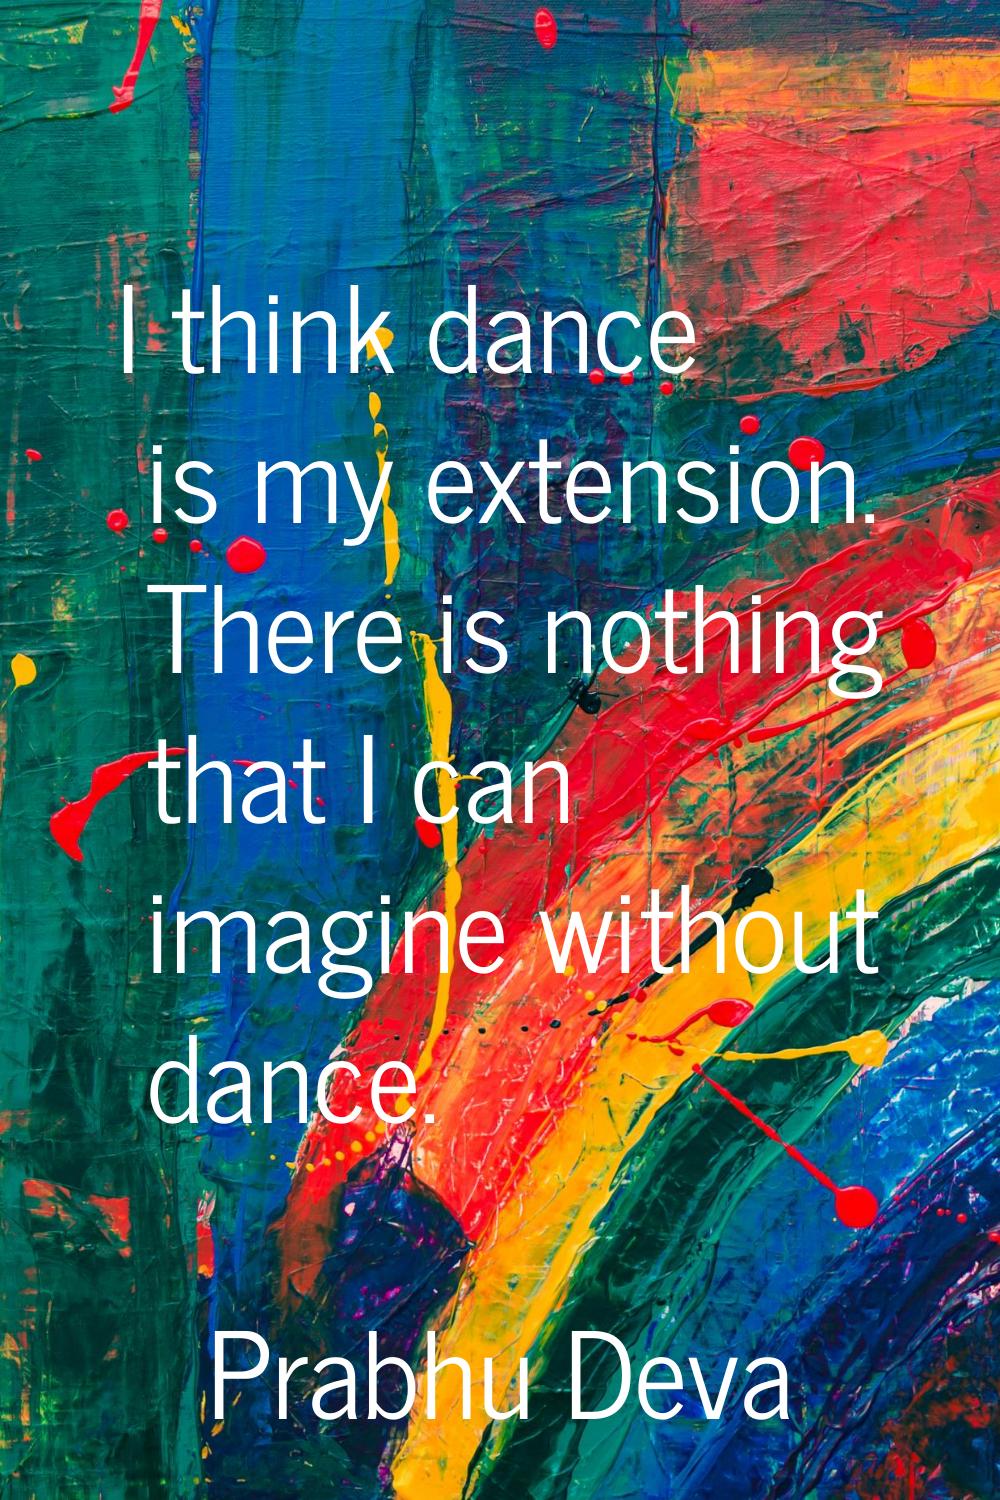 I think dance is my extension. There is nothing that I can imagine without dance.